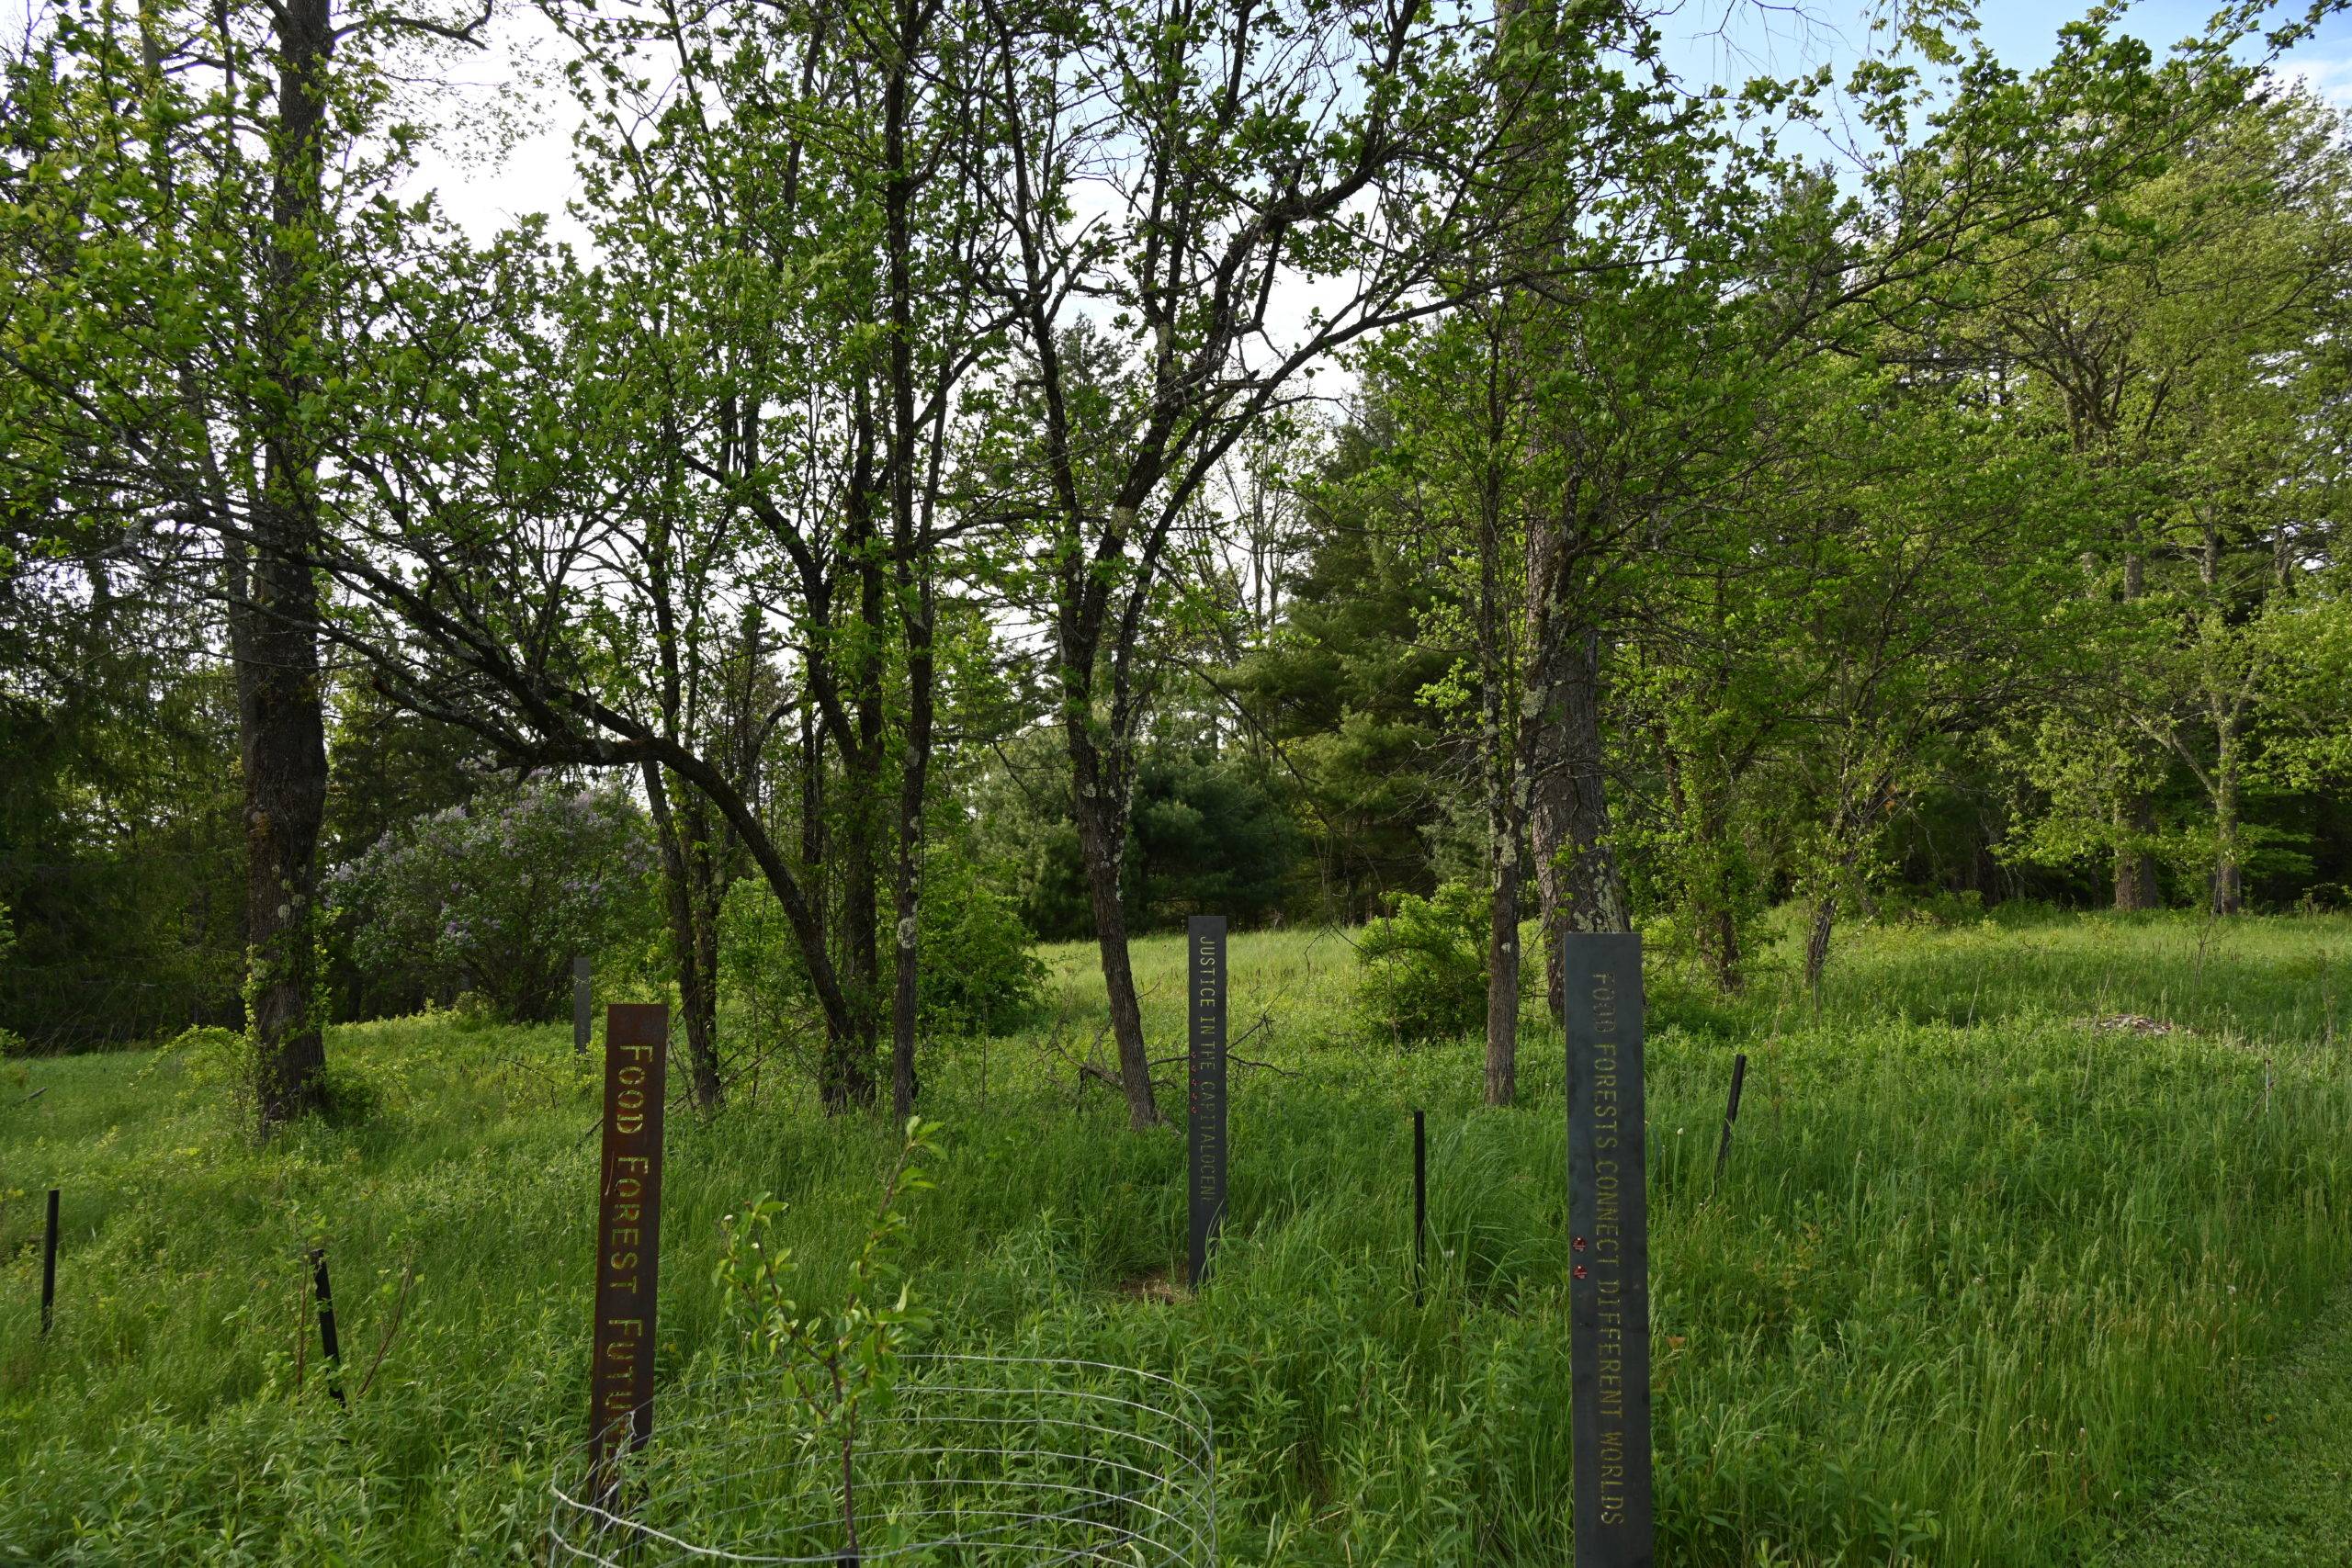 Food Forest Futures installation -- related plantings and signs